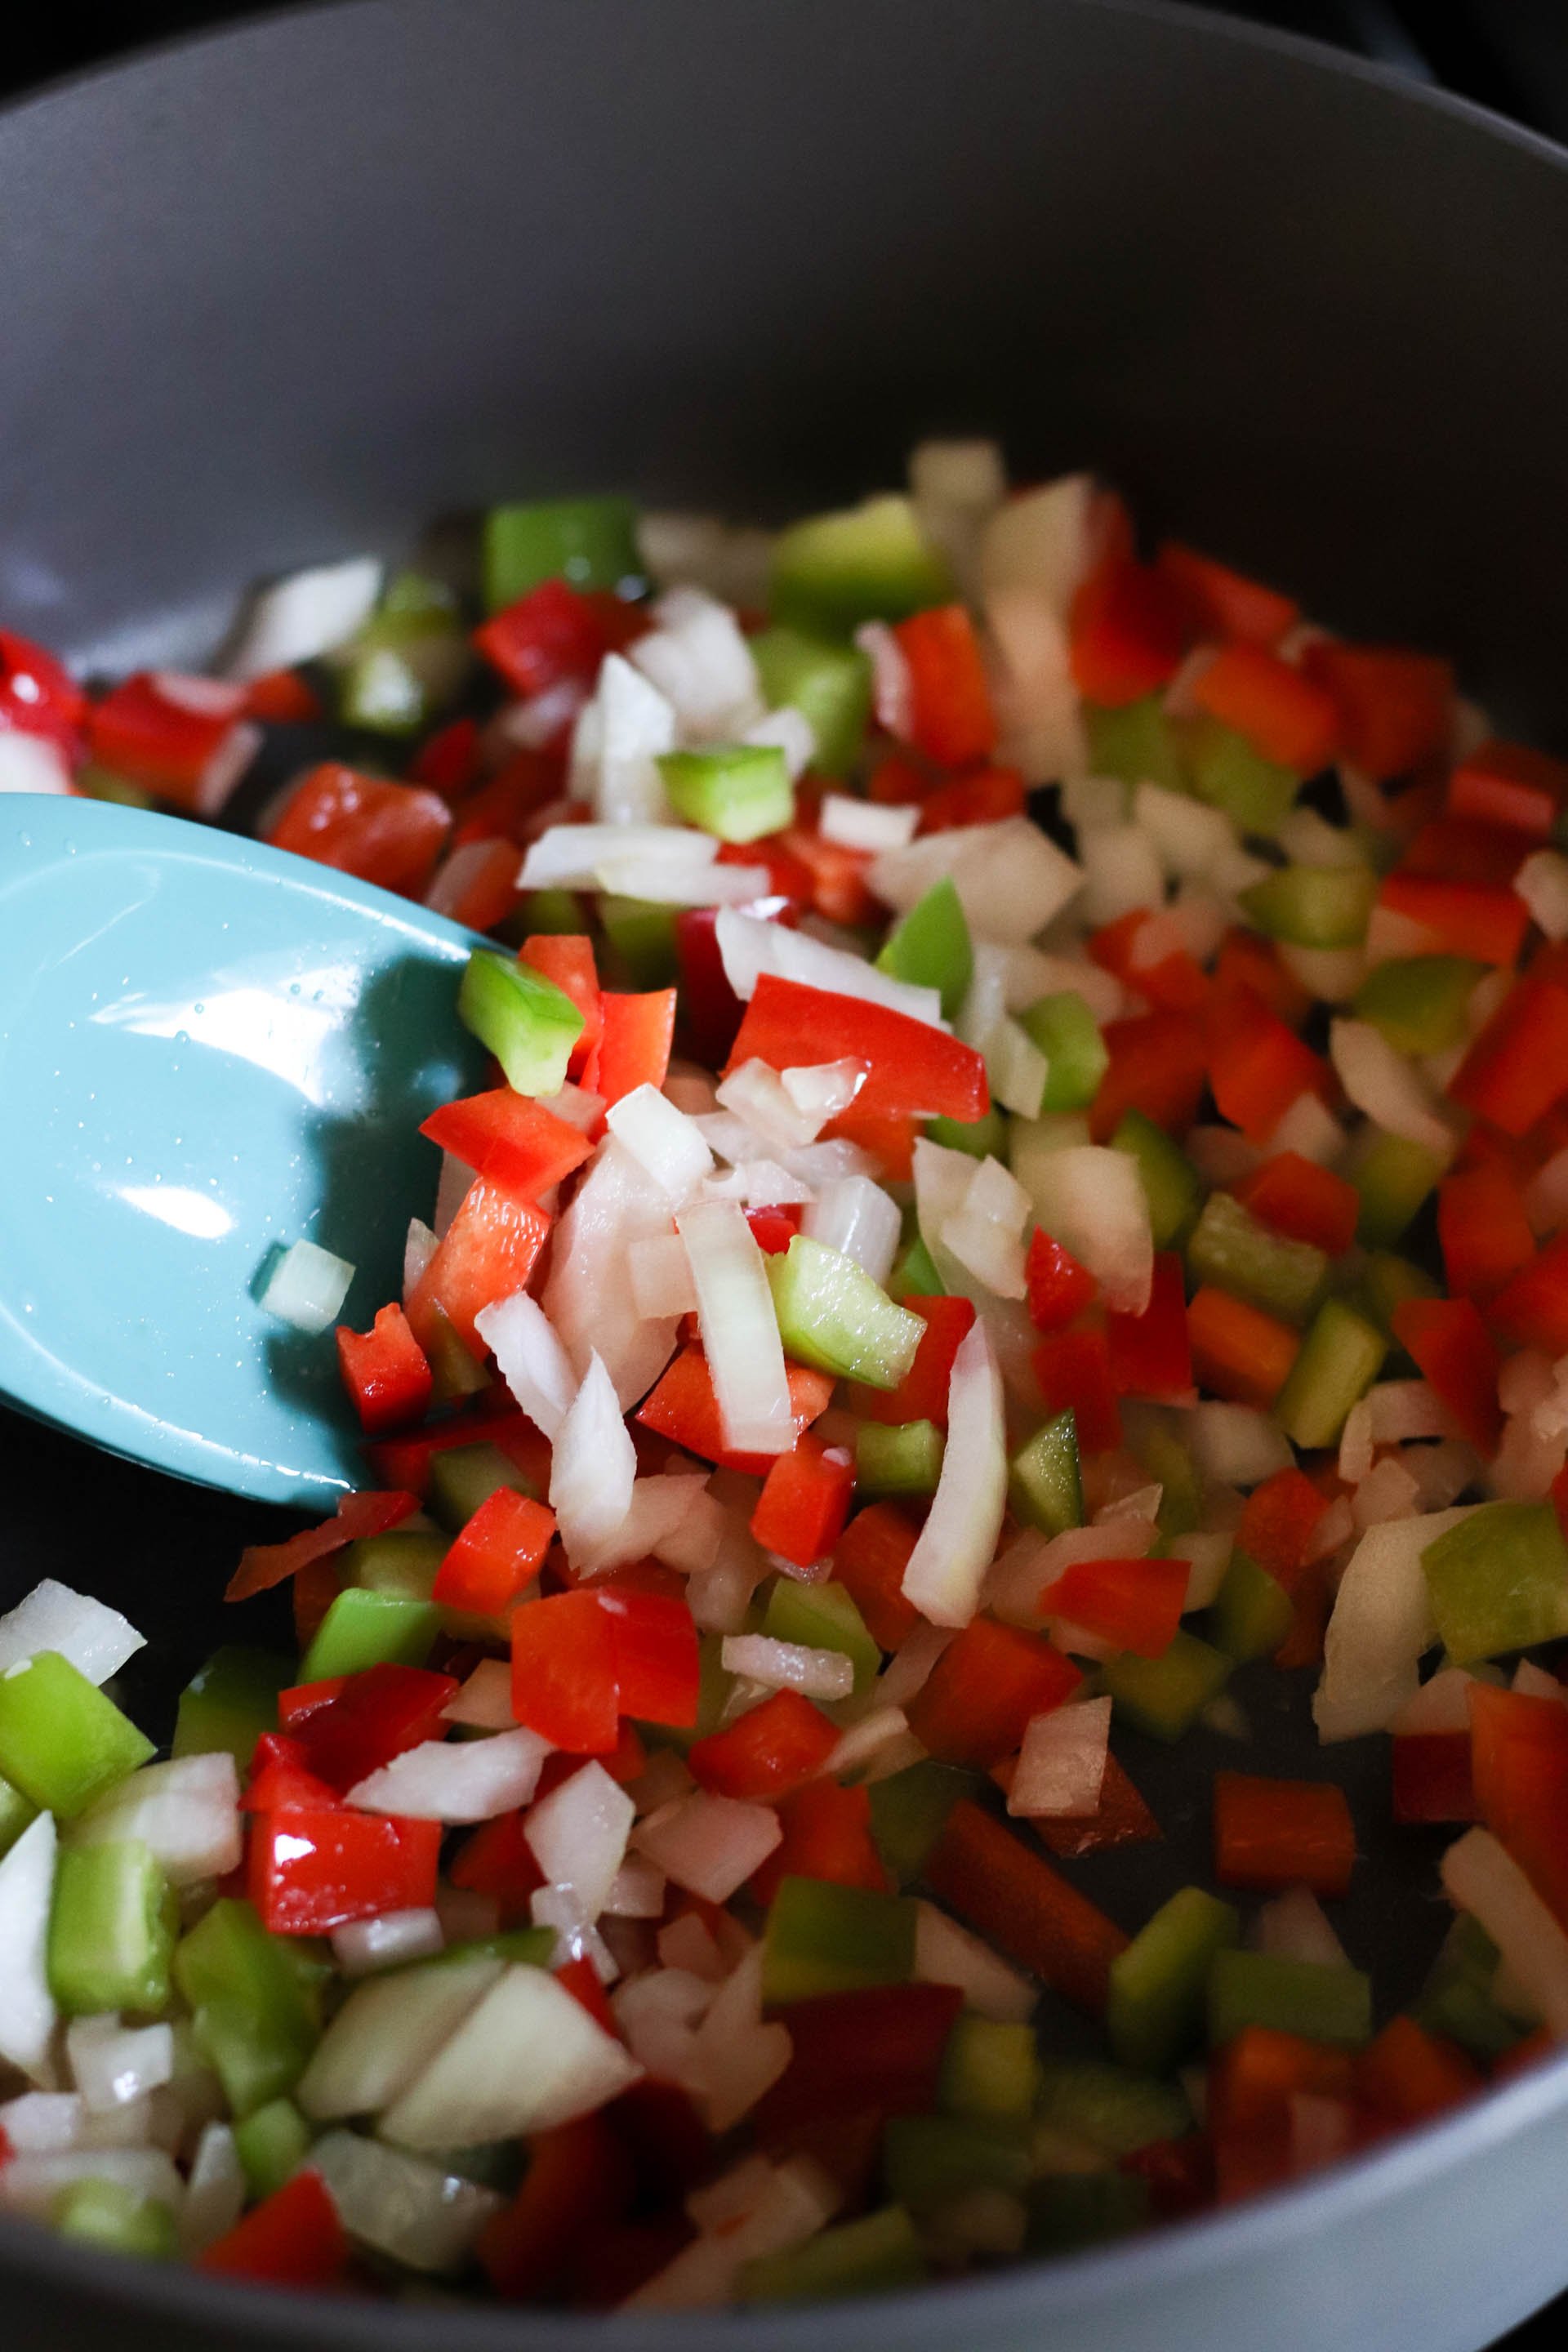 Chopped veggies in a large non stick skillet